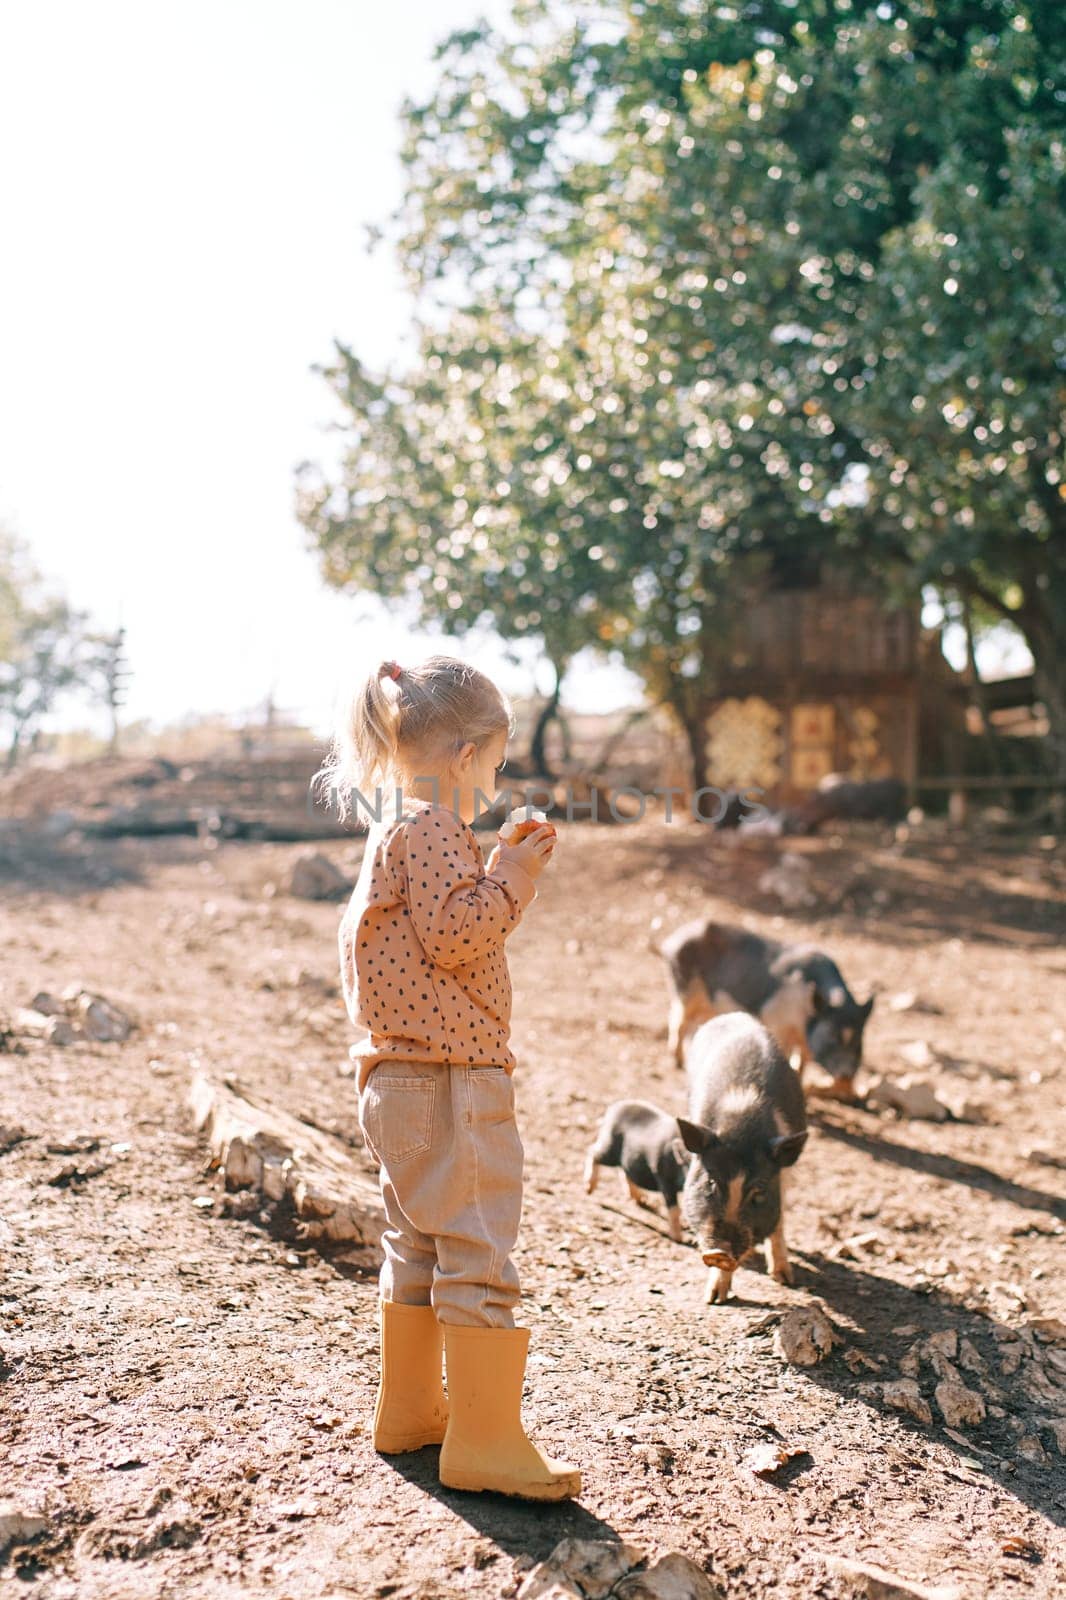 Little girl with an apple in her hand stands near fluffy small pigs grazing in the park. High quality photo